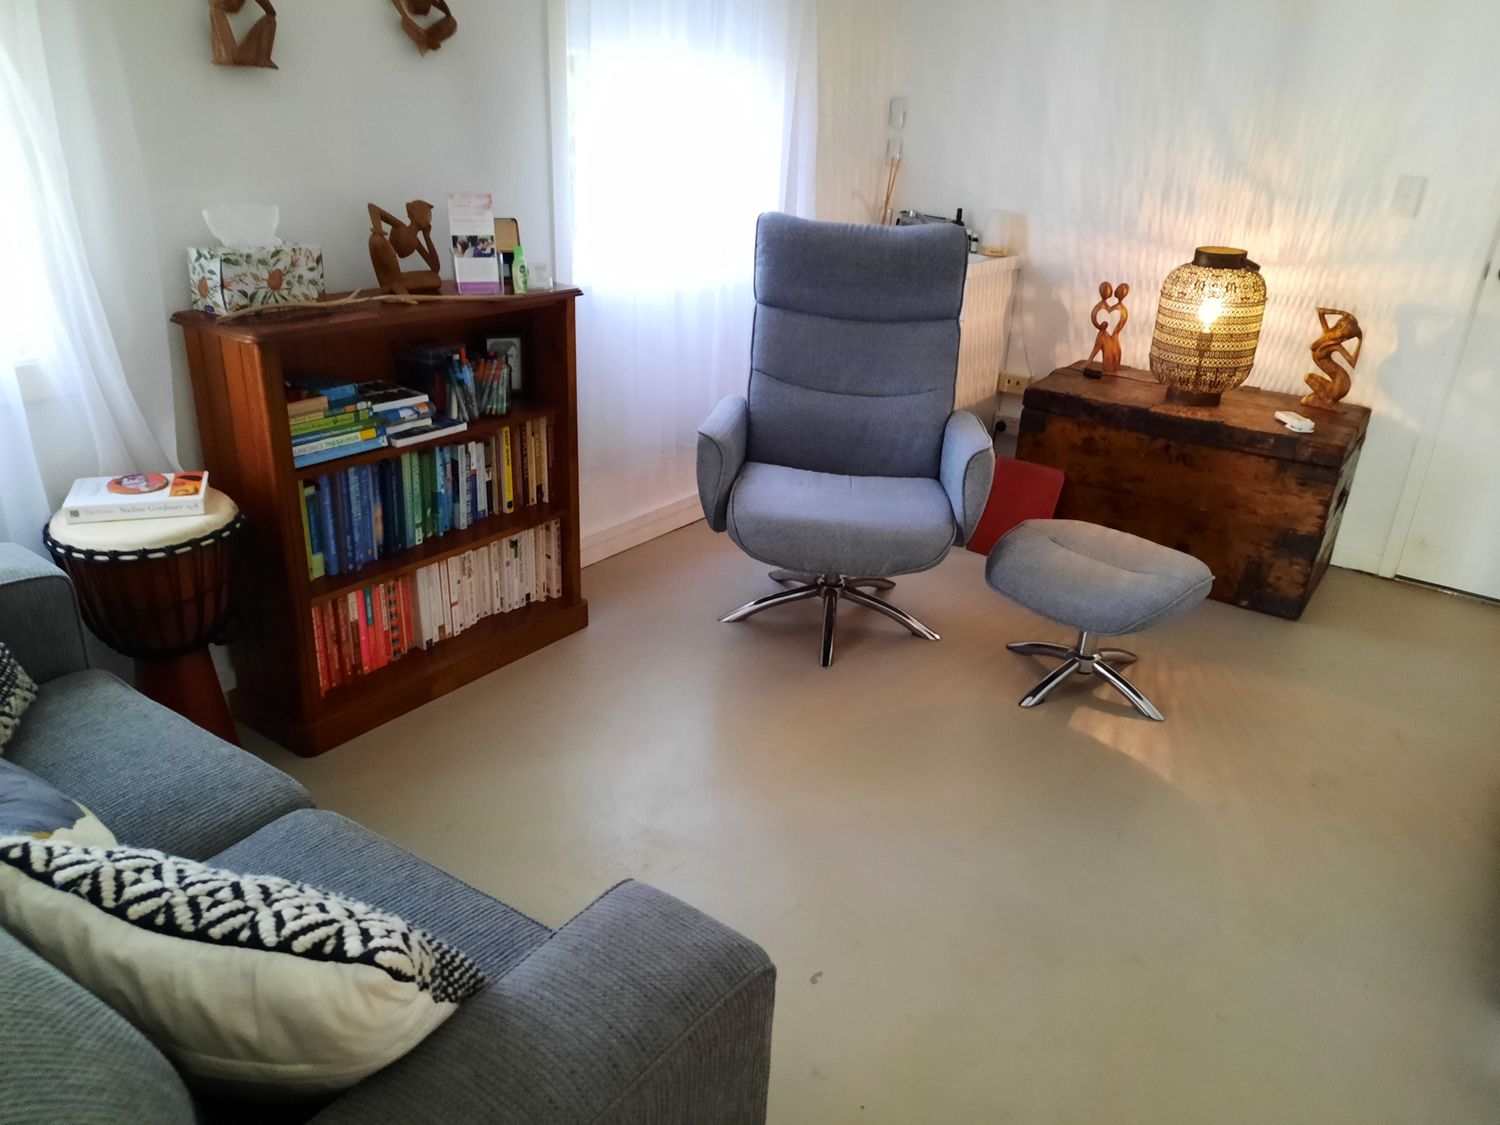 Gallery Photo of Crystal Clear Counselling Consulting Room